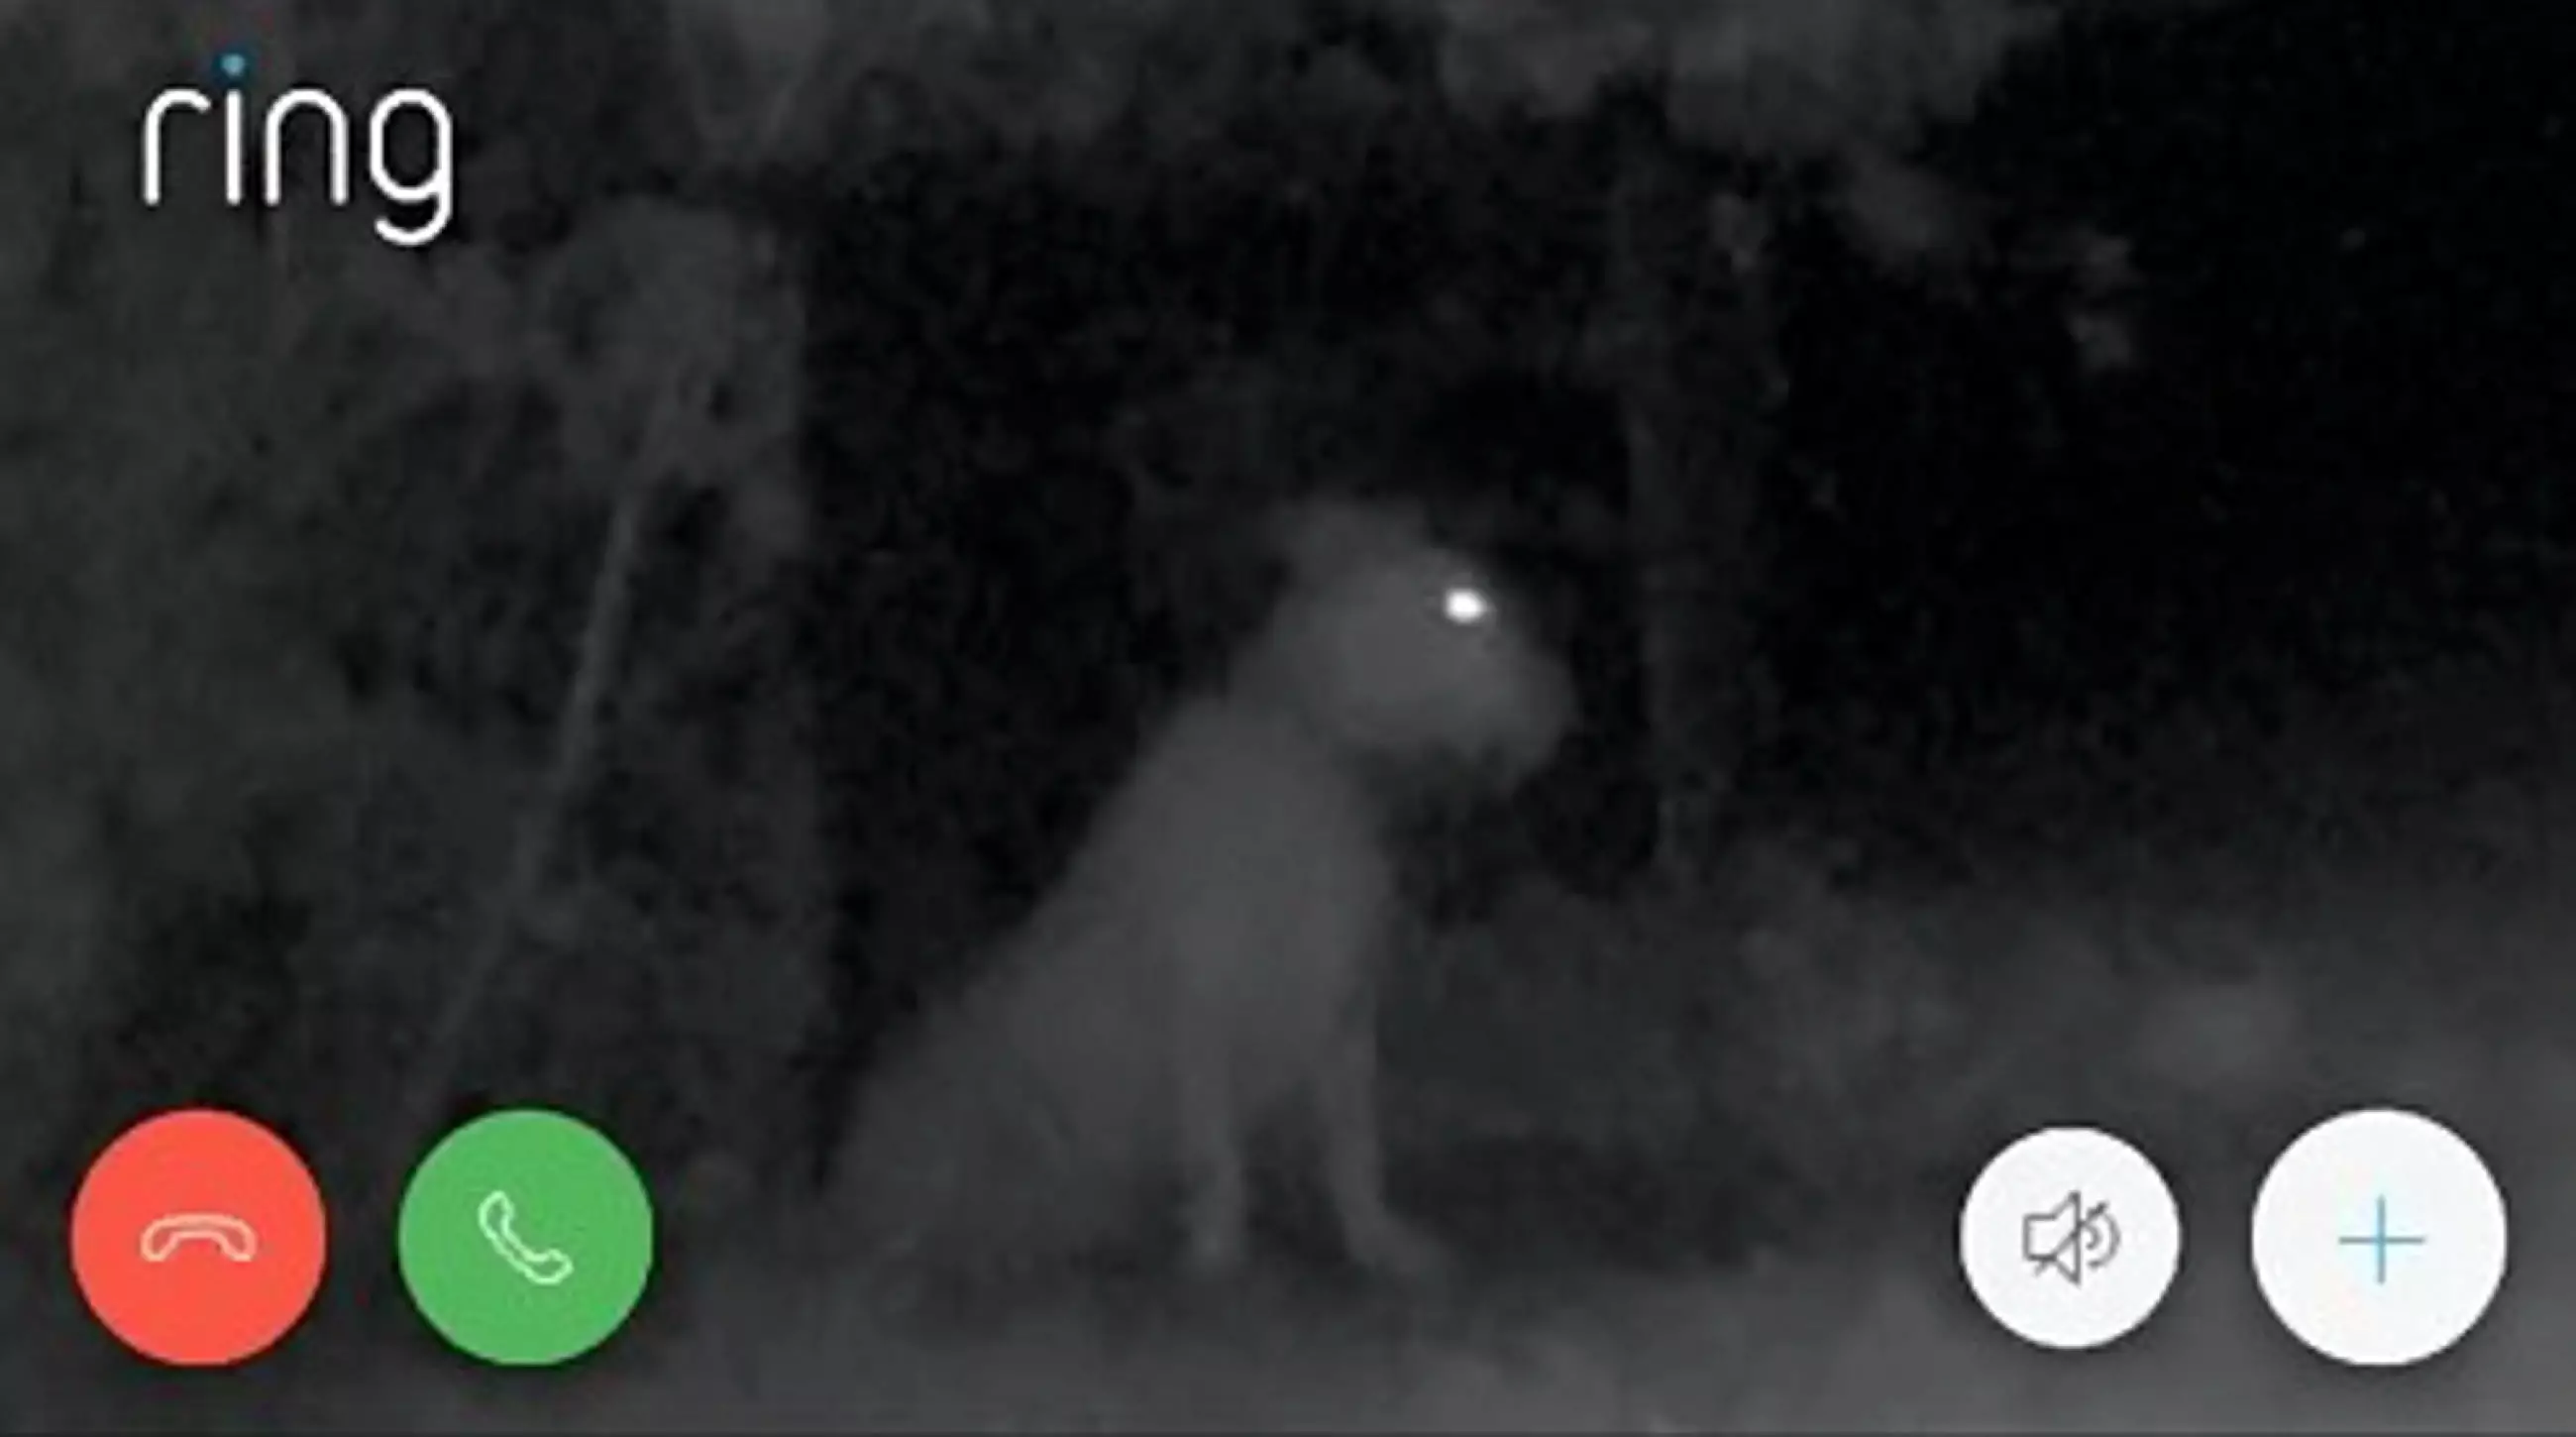 Zena pictured on the night camera.